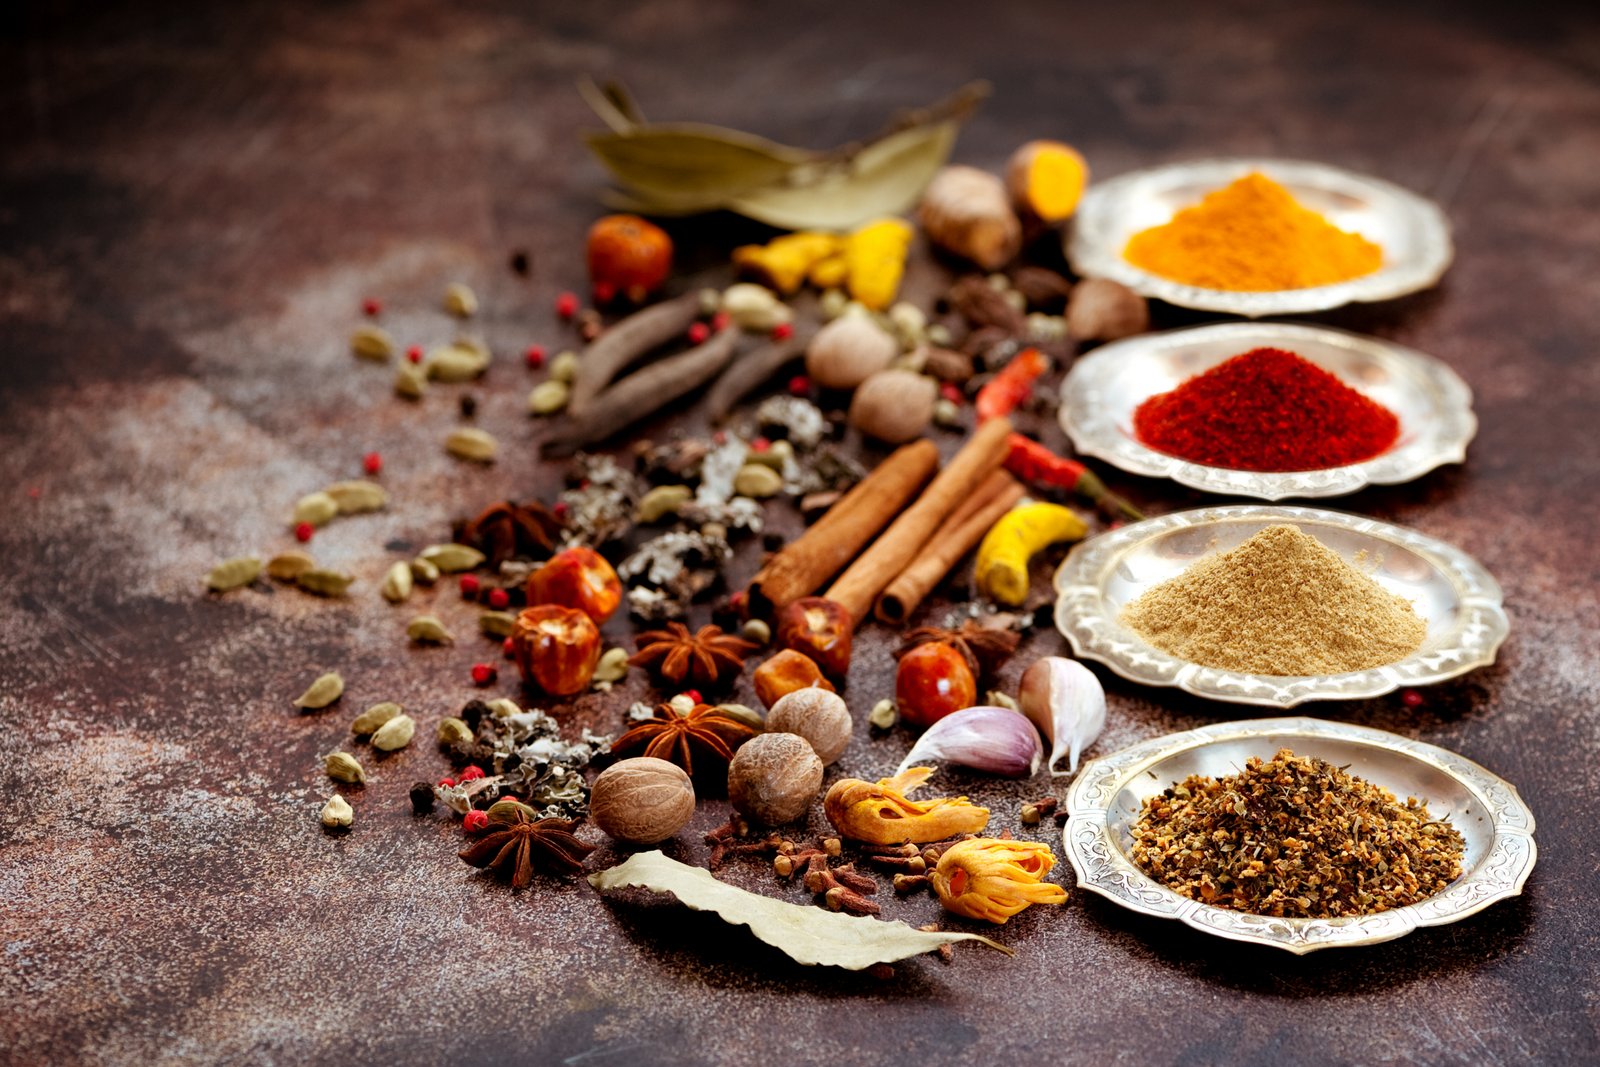 Herbs and Spices are Truthful for Your Health